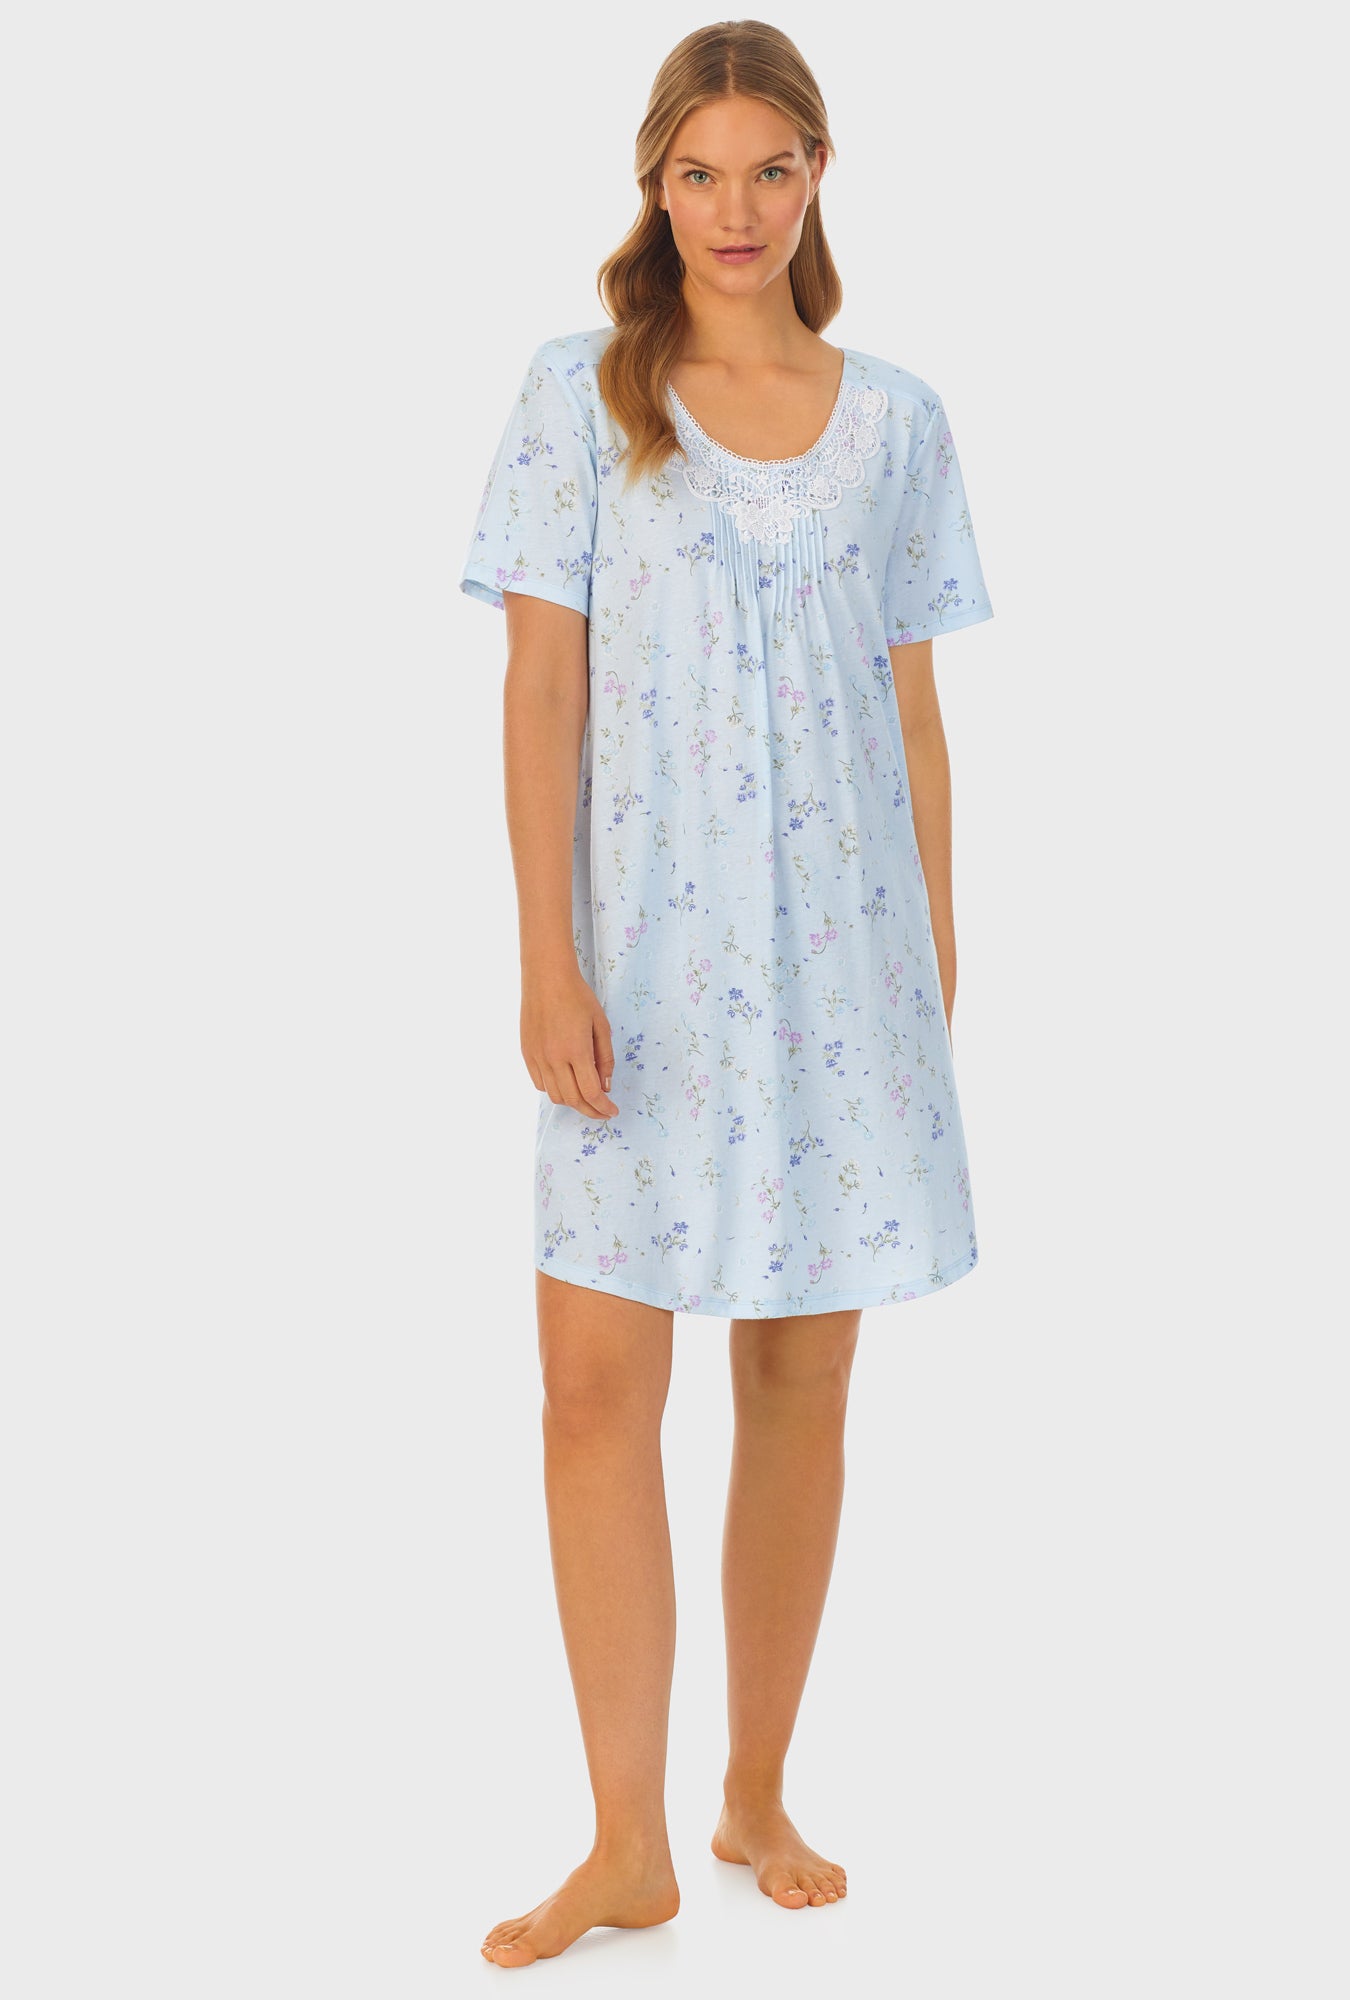 A lady wearing Cotton Short Nightgown with Spring Floral print